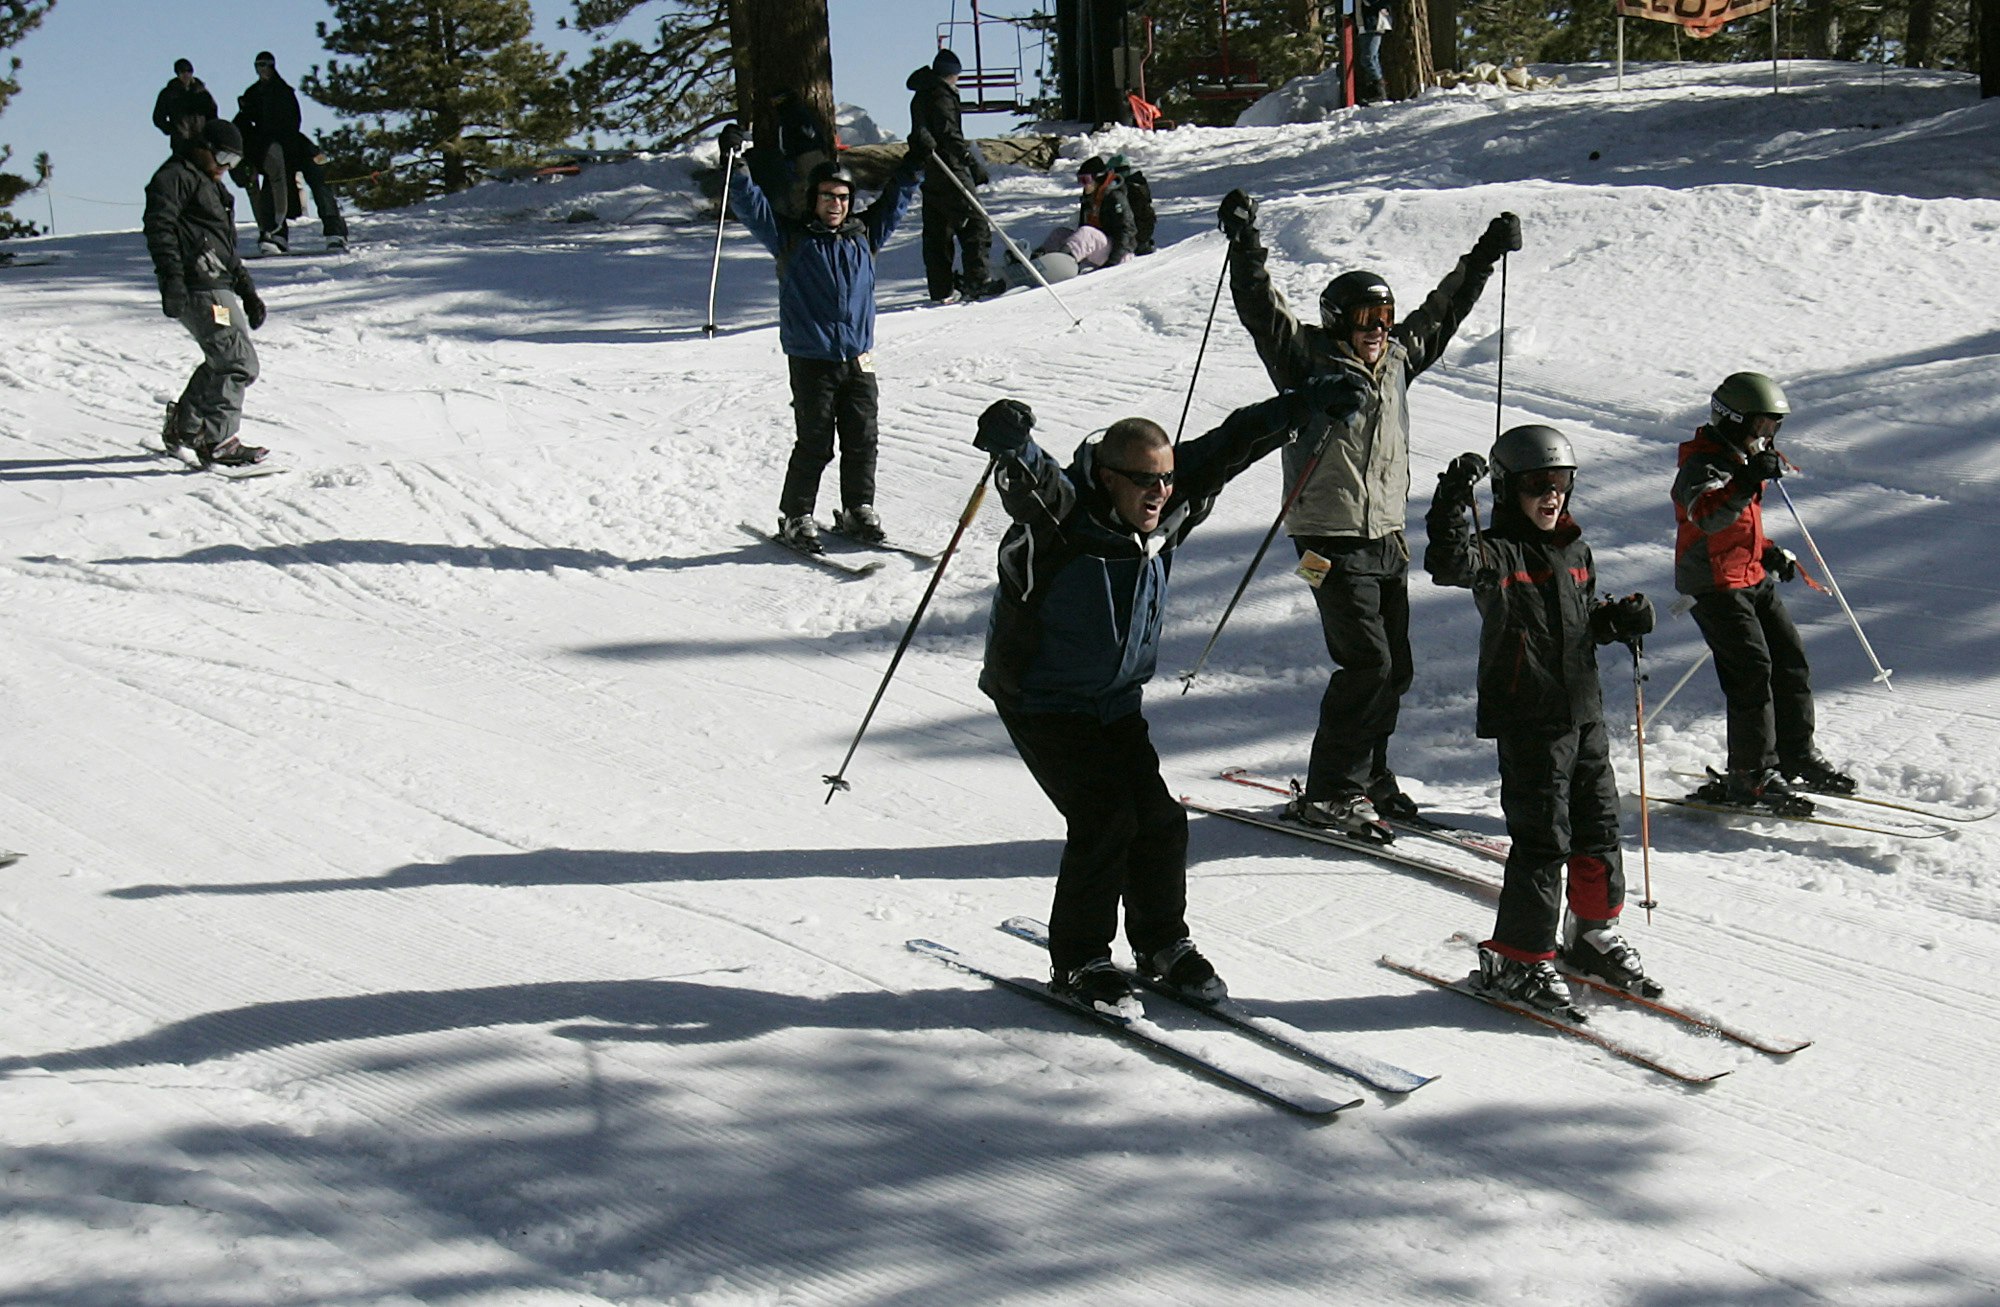 Two men and two boys in dark colored ski apparel raise their hands and ski poles in excitement as they coast down the slope of Mt. Waterman on a groomed ski trail